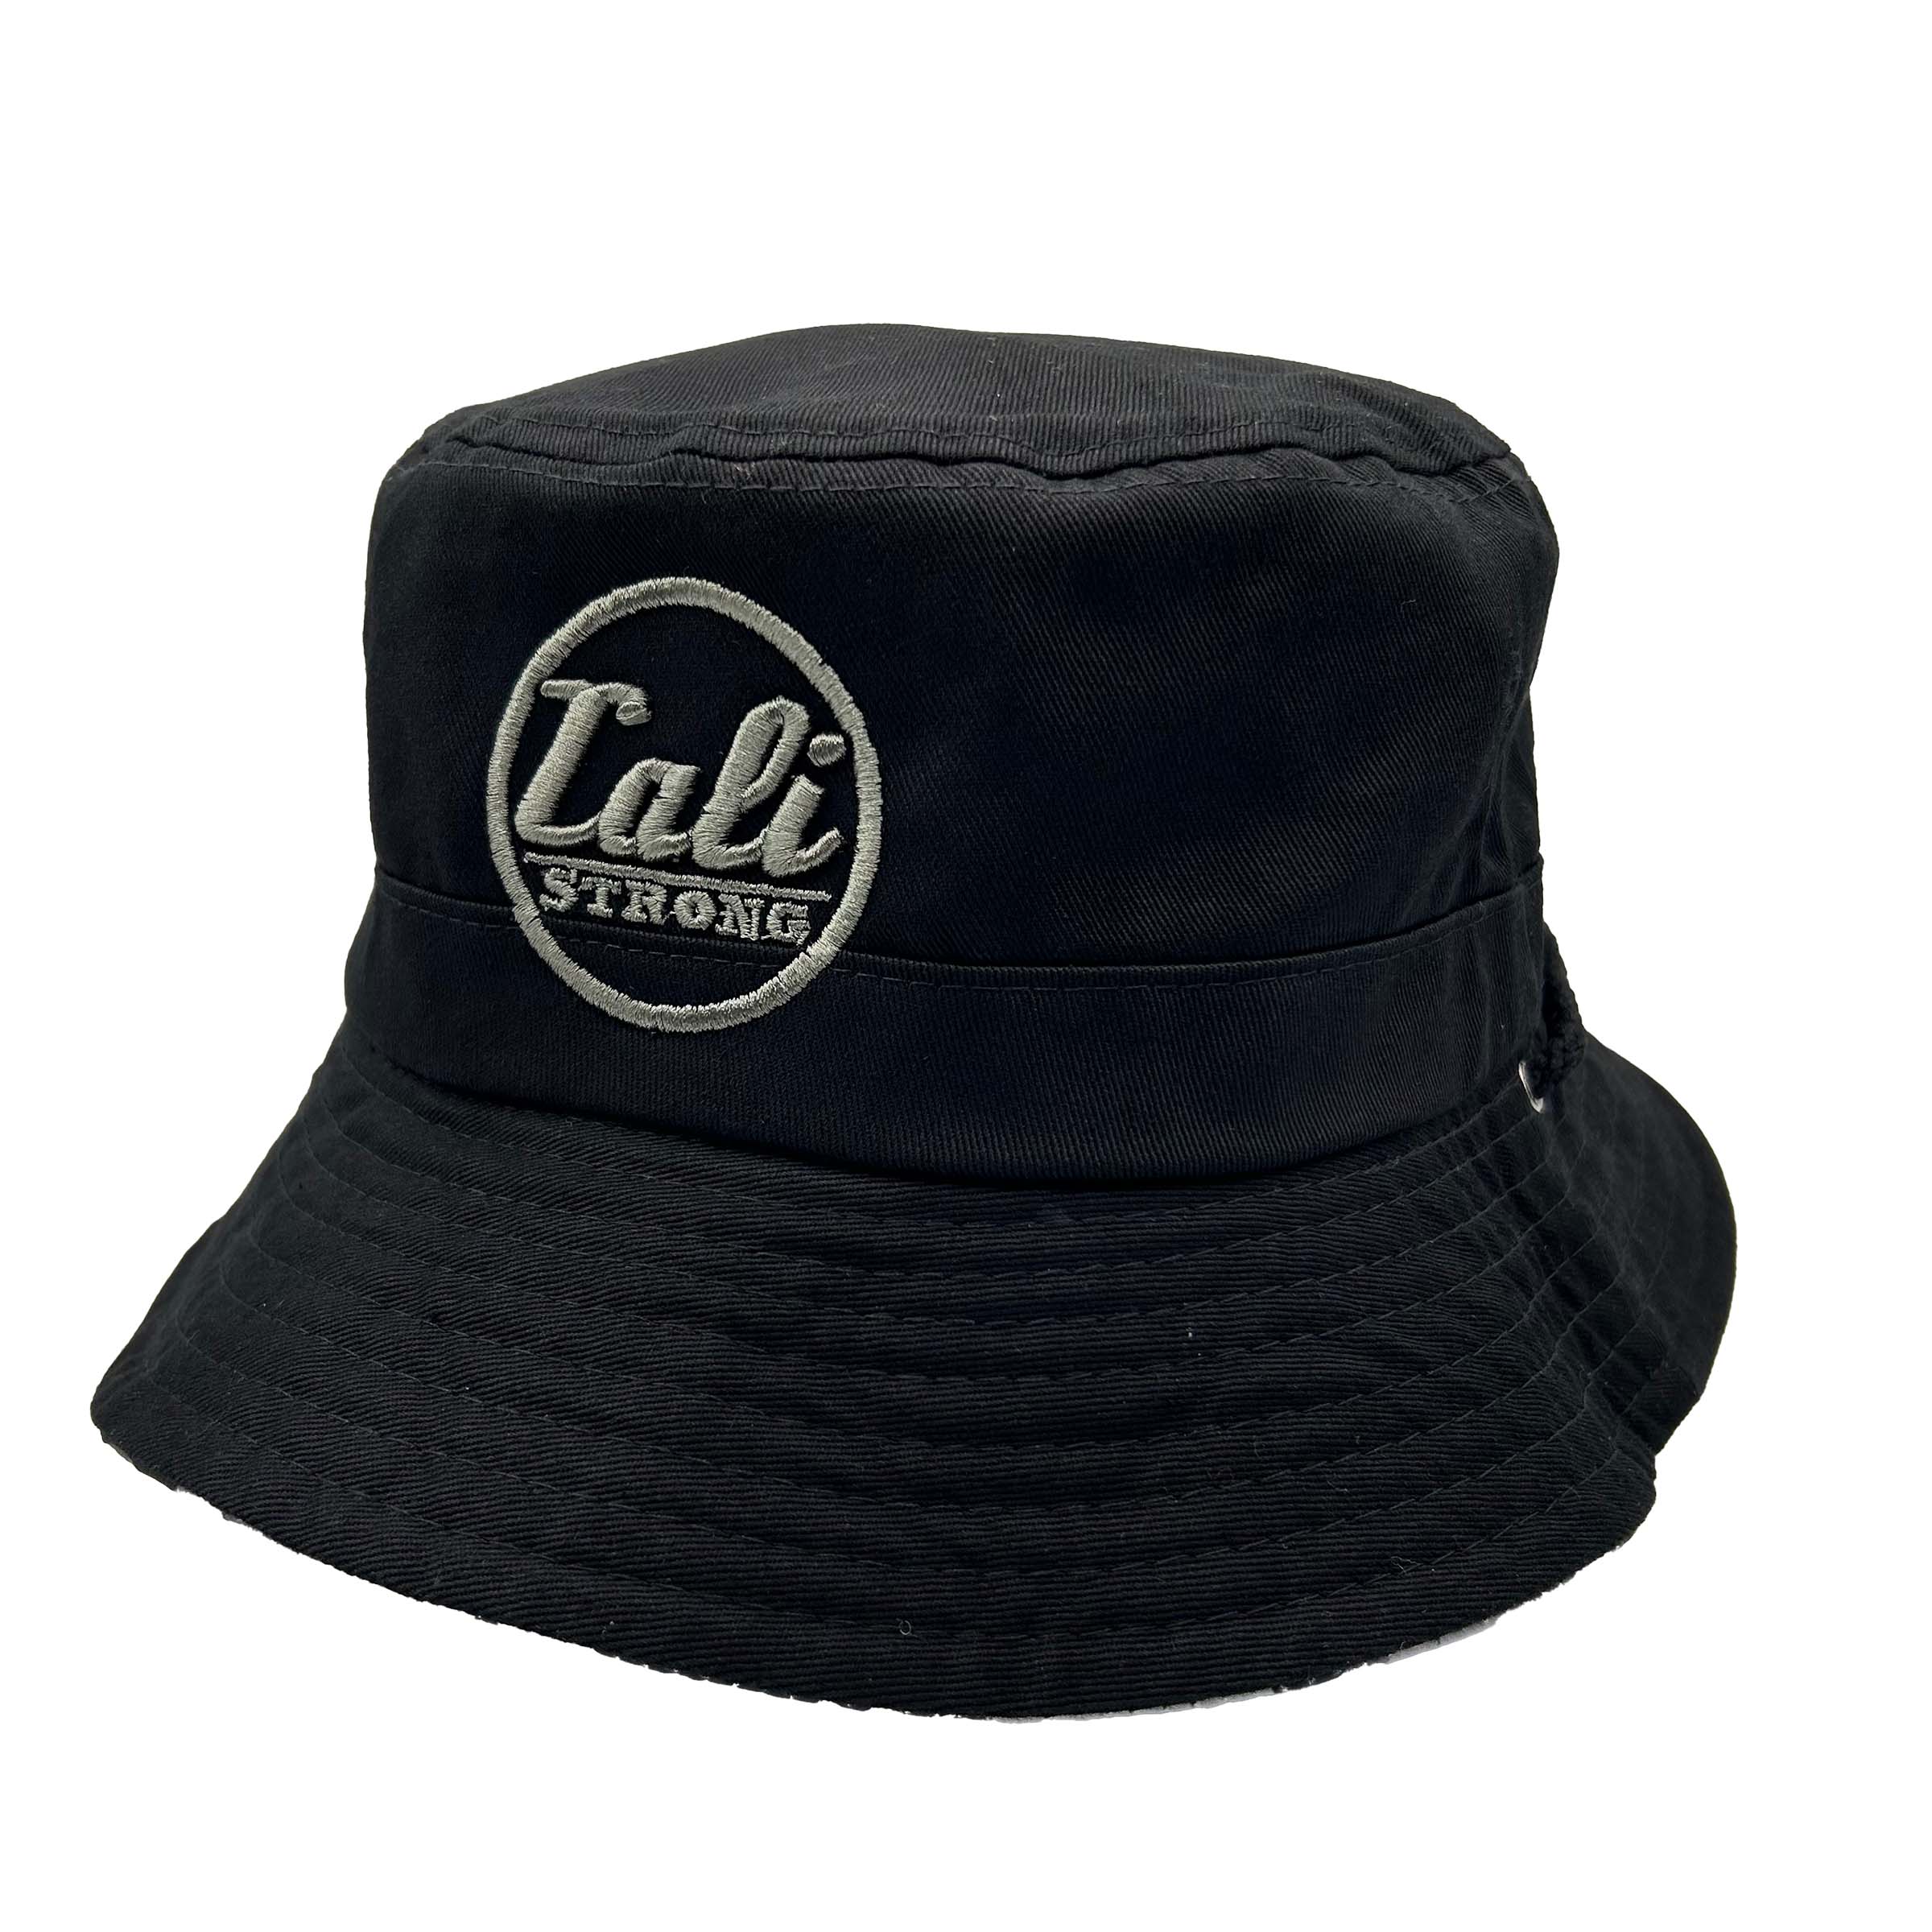 CALI Strong Urban Camo Reversible Black Bucket Hat Tactical Morale Patch - Bucket Hat - Image 3 - CALI Strong